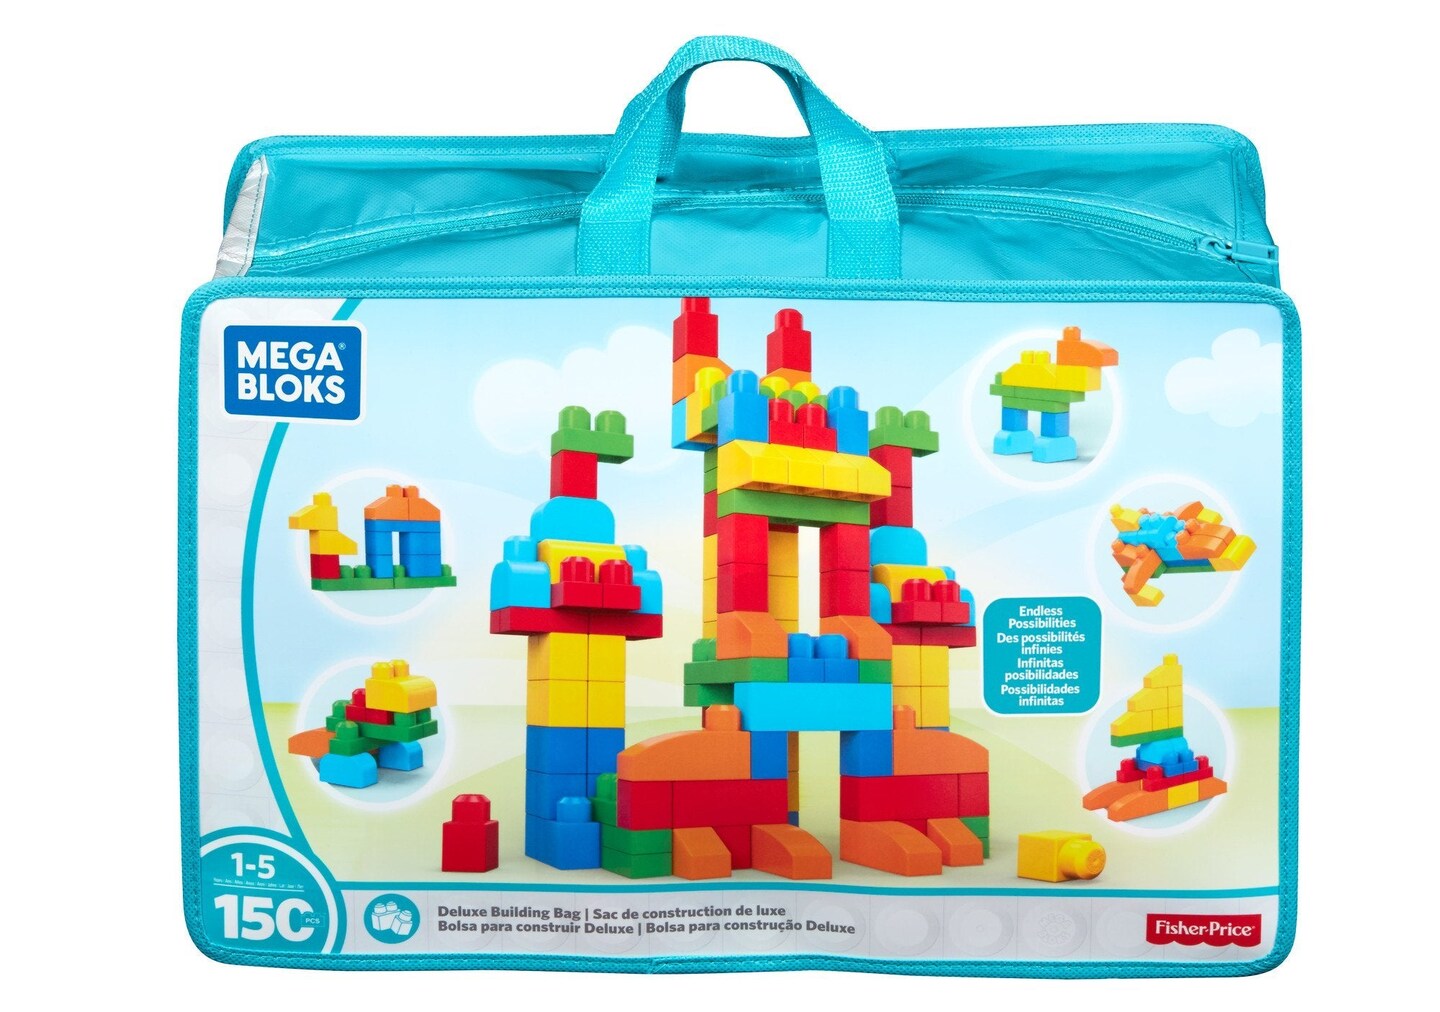 MEGA BLOKS Fisher-Price Toddler Block Toys, Deluxe Building Bag with 150 Pieces and Storage Bag, Gift Ideas for Kids Age 1+ Years (Amazon Exclusive)